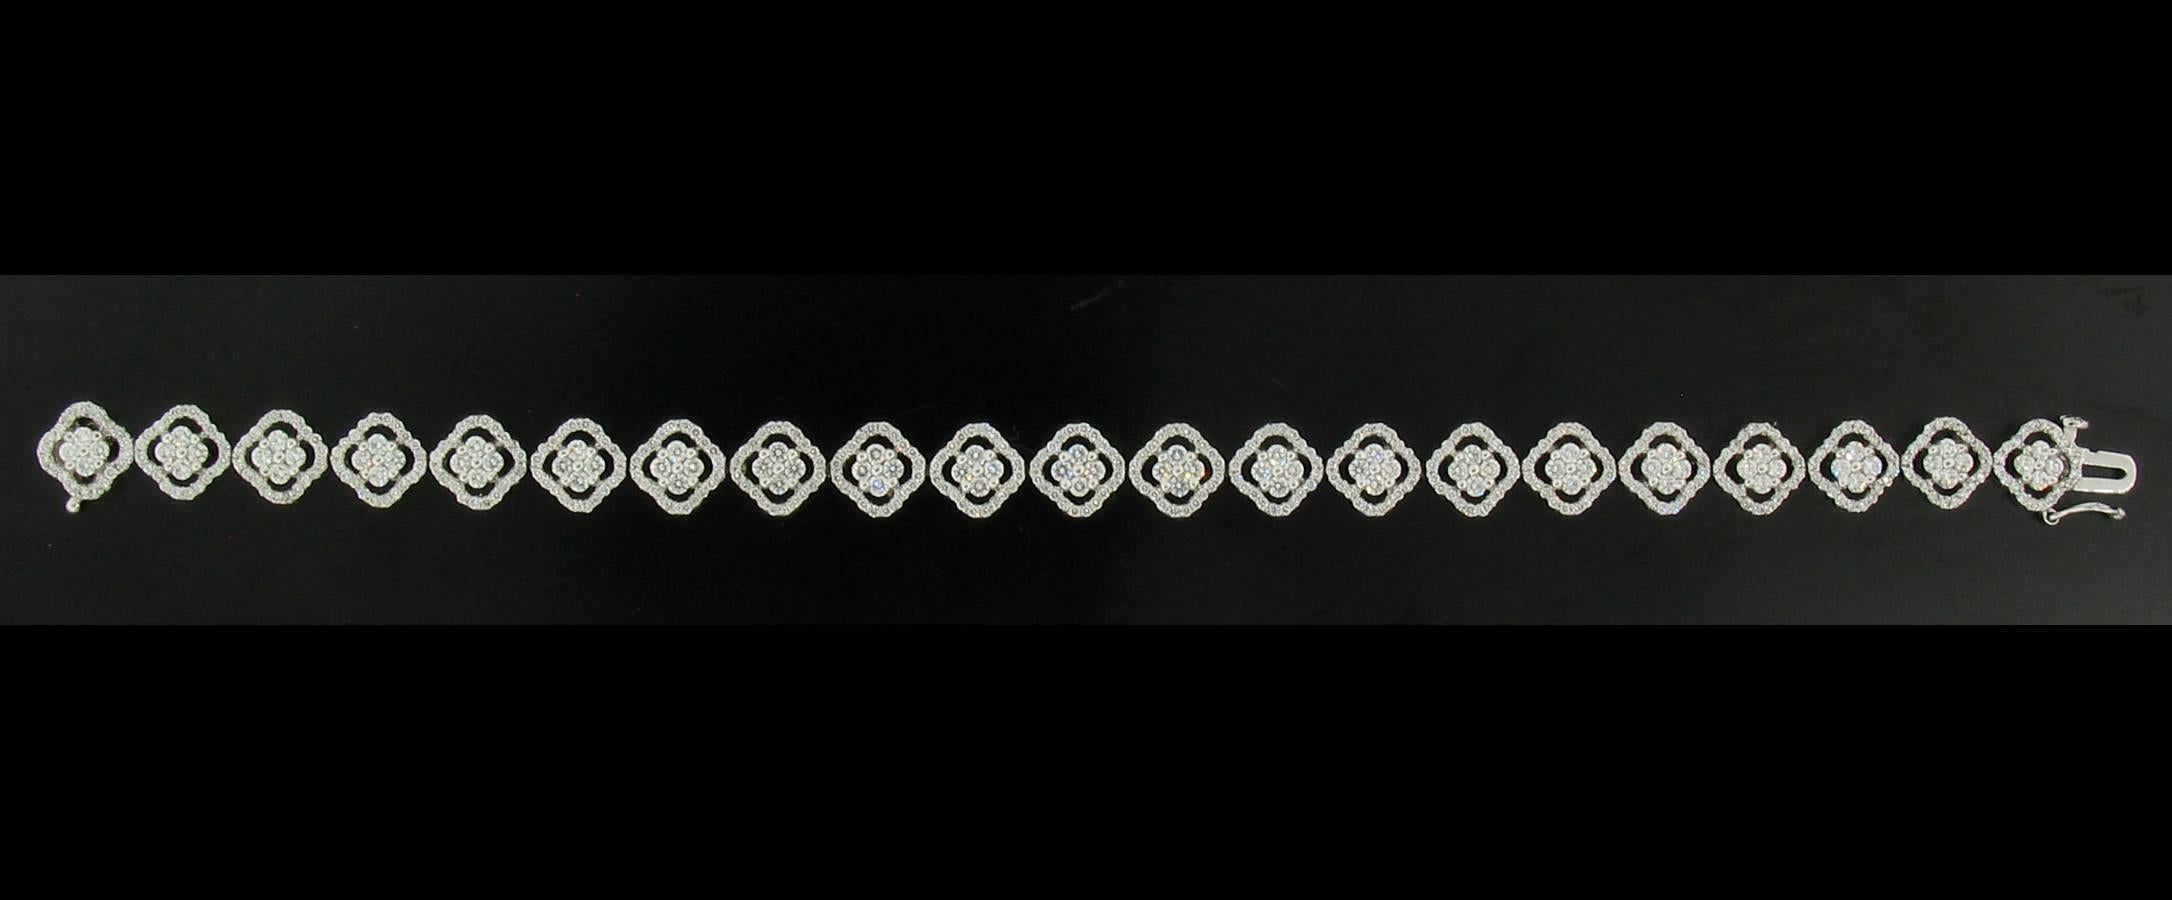 Beautiful 'Quatrefoil' shaped sections make this a lovely diamond tennis bracelet.  Designed by Charles Wolfe, Diamonds weigh a total of 4.12 carats, set in 18k white gold.  Stamped CWC and 18k.  6 3/4"l x 5/16"w x 1/8" deep.